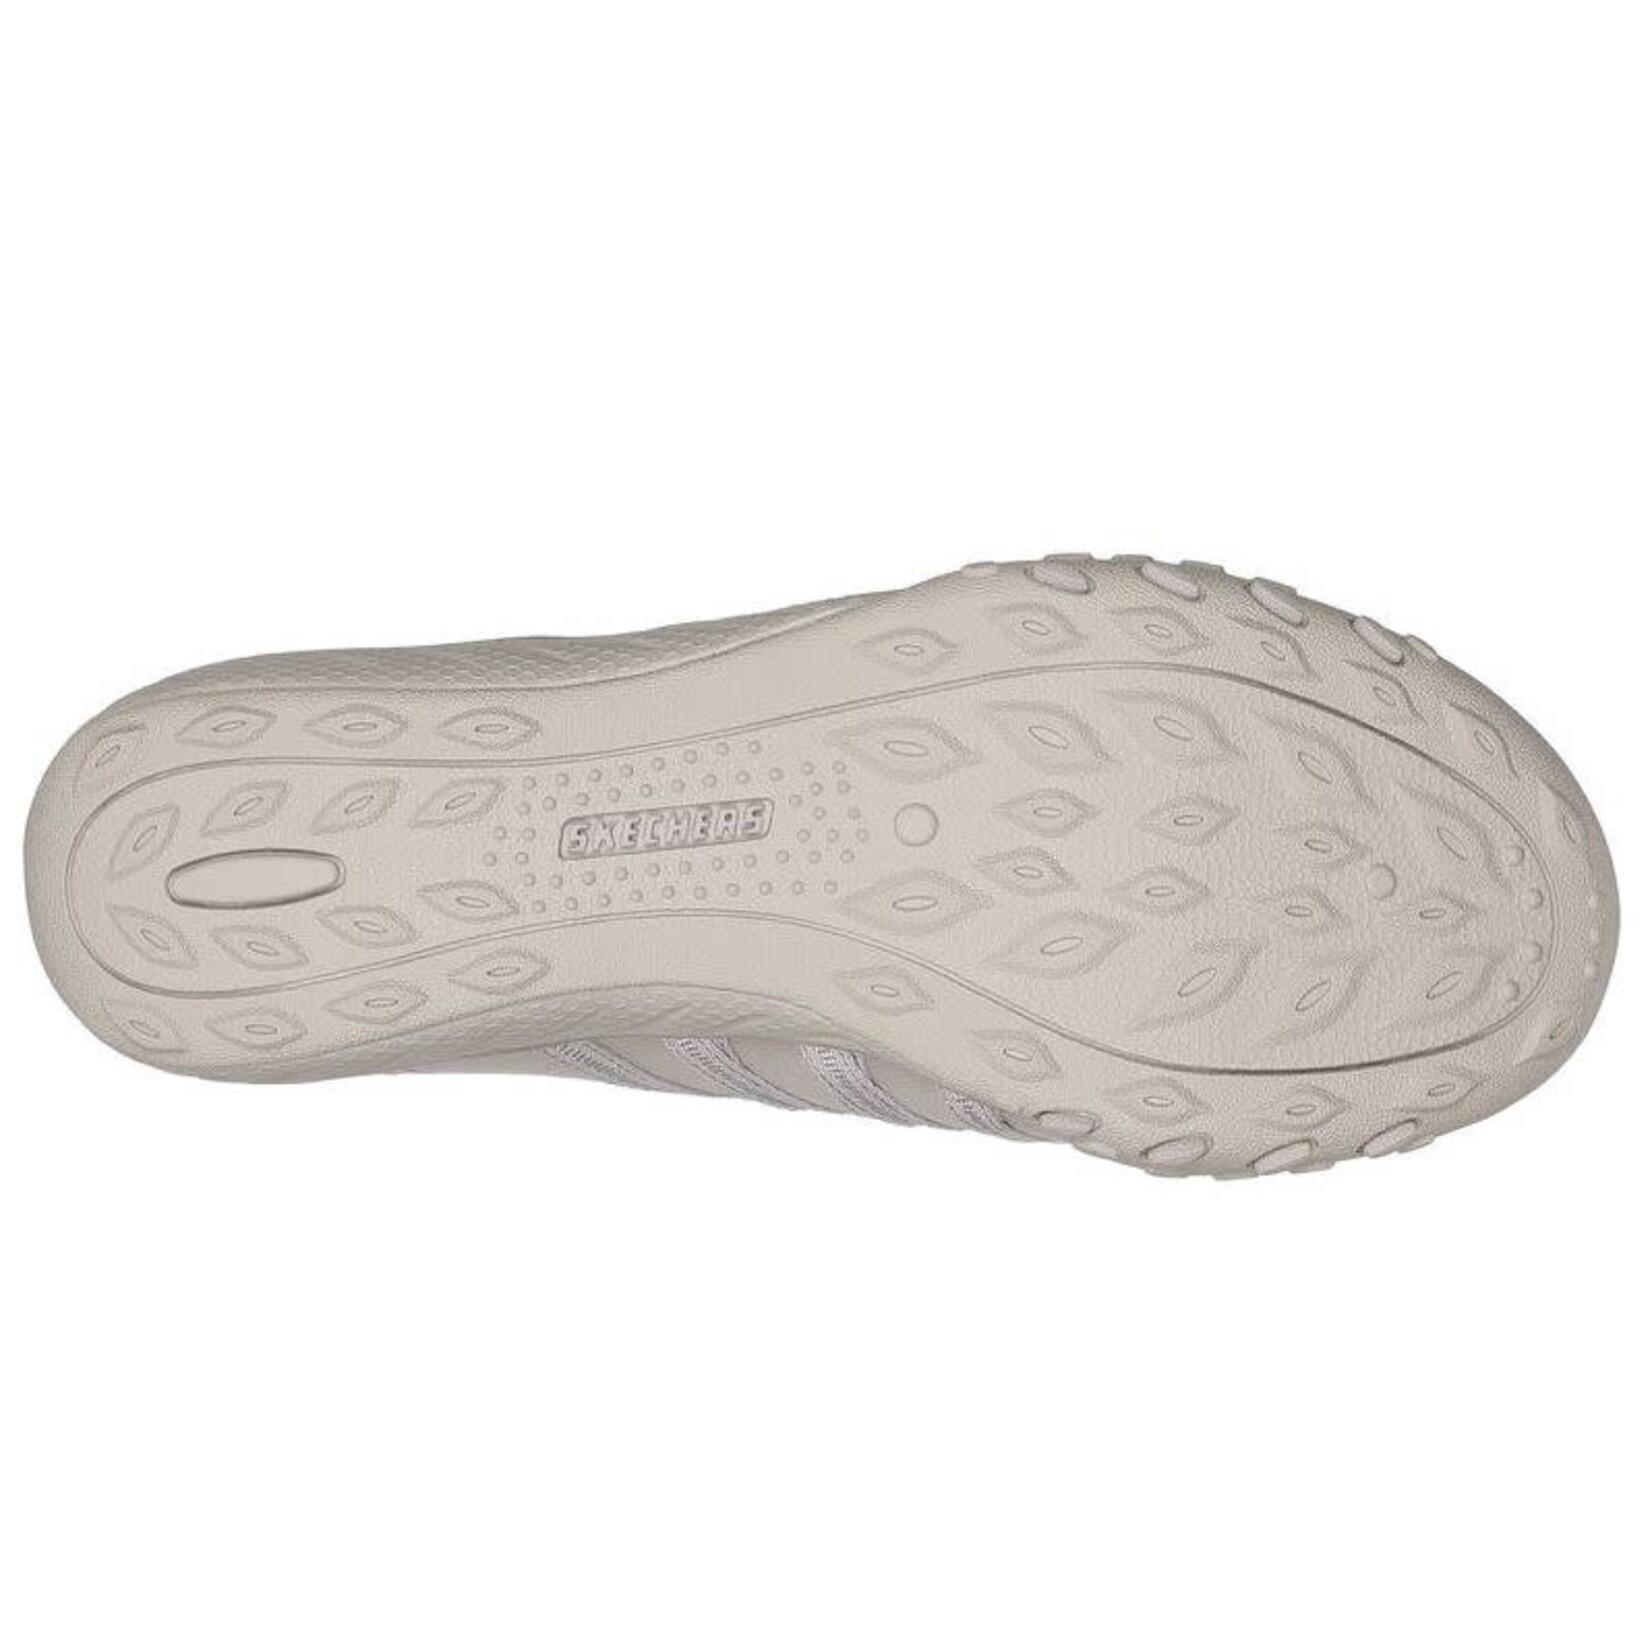 Skechers Slip Ins: Breathe Easy - Roll With Me